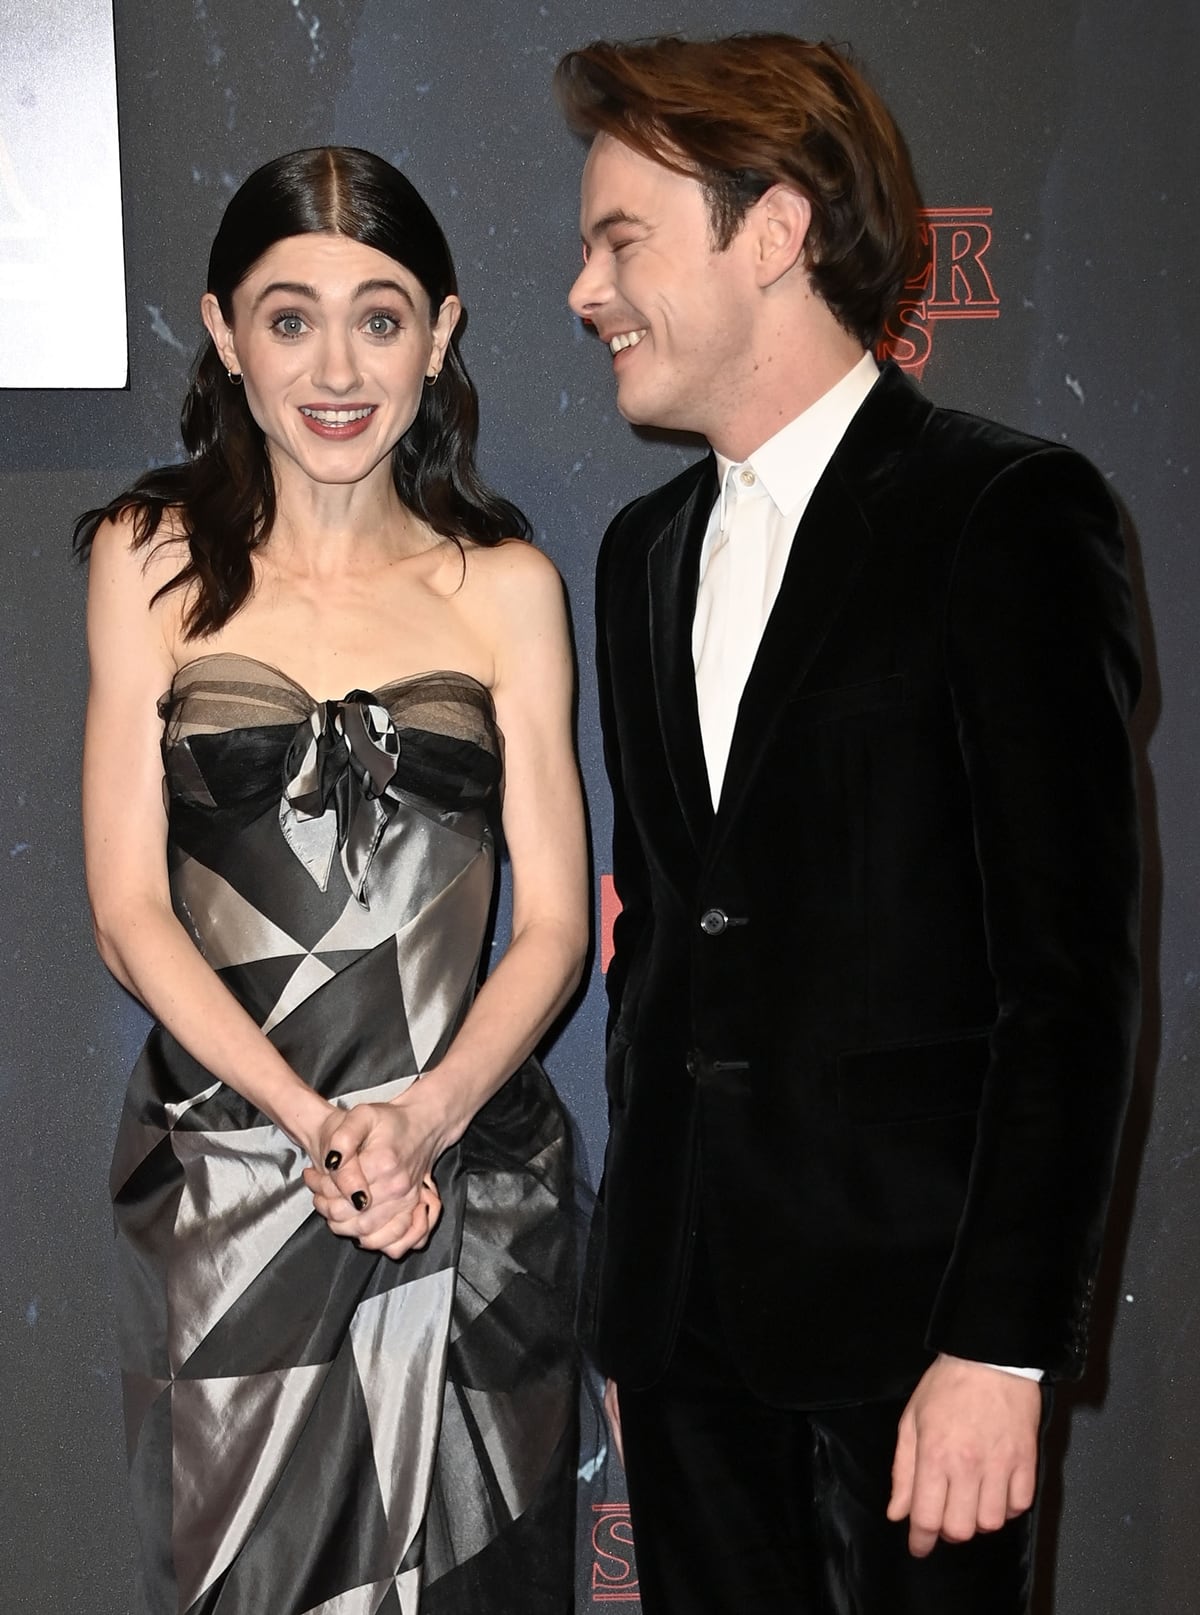 Stranger Things stars Natalia Dyer and Charlie Heaton started dating in 2016